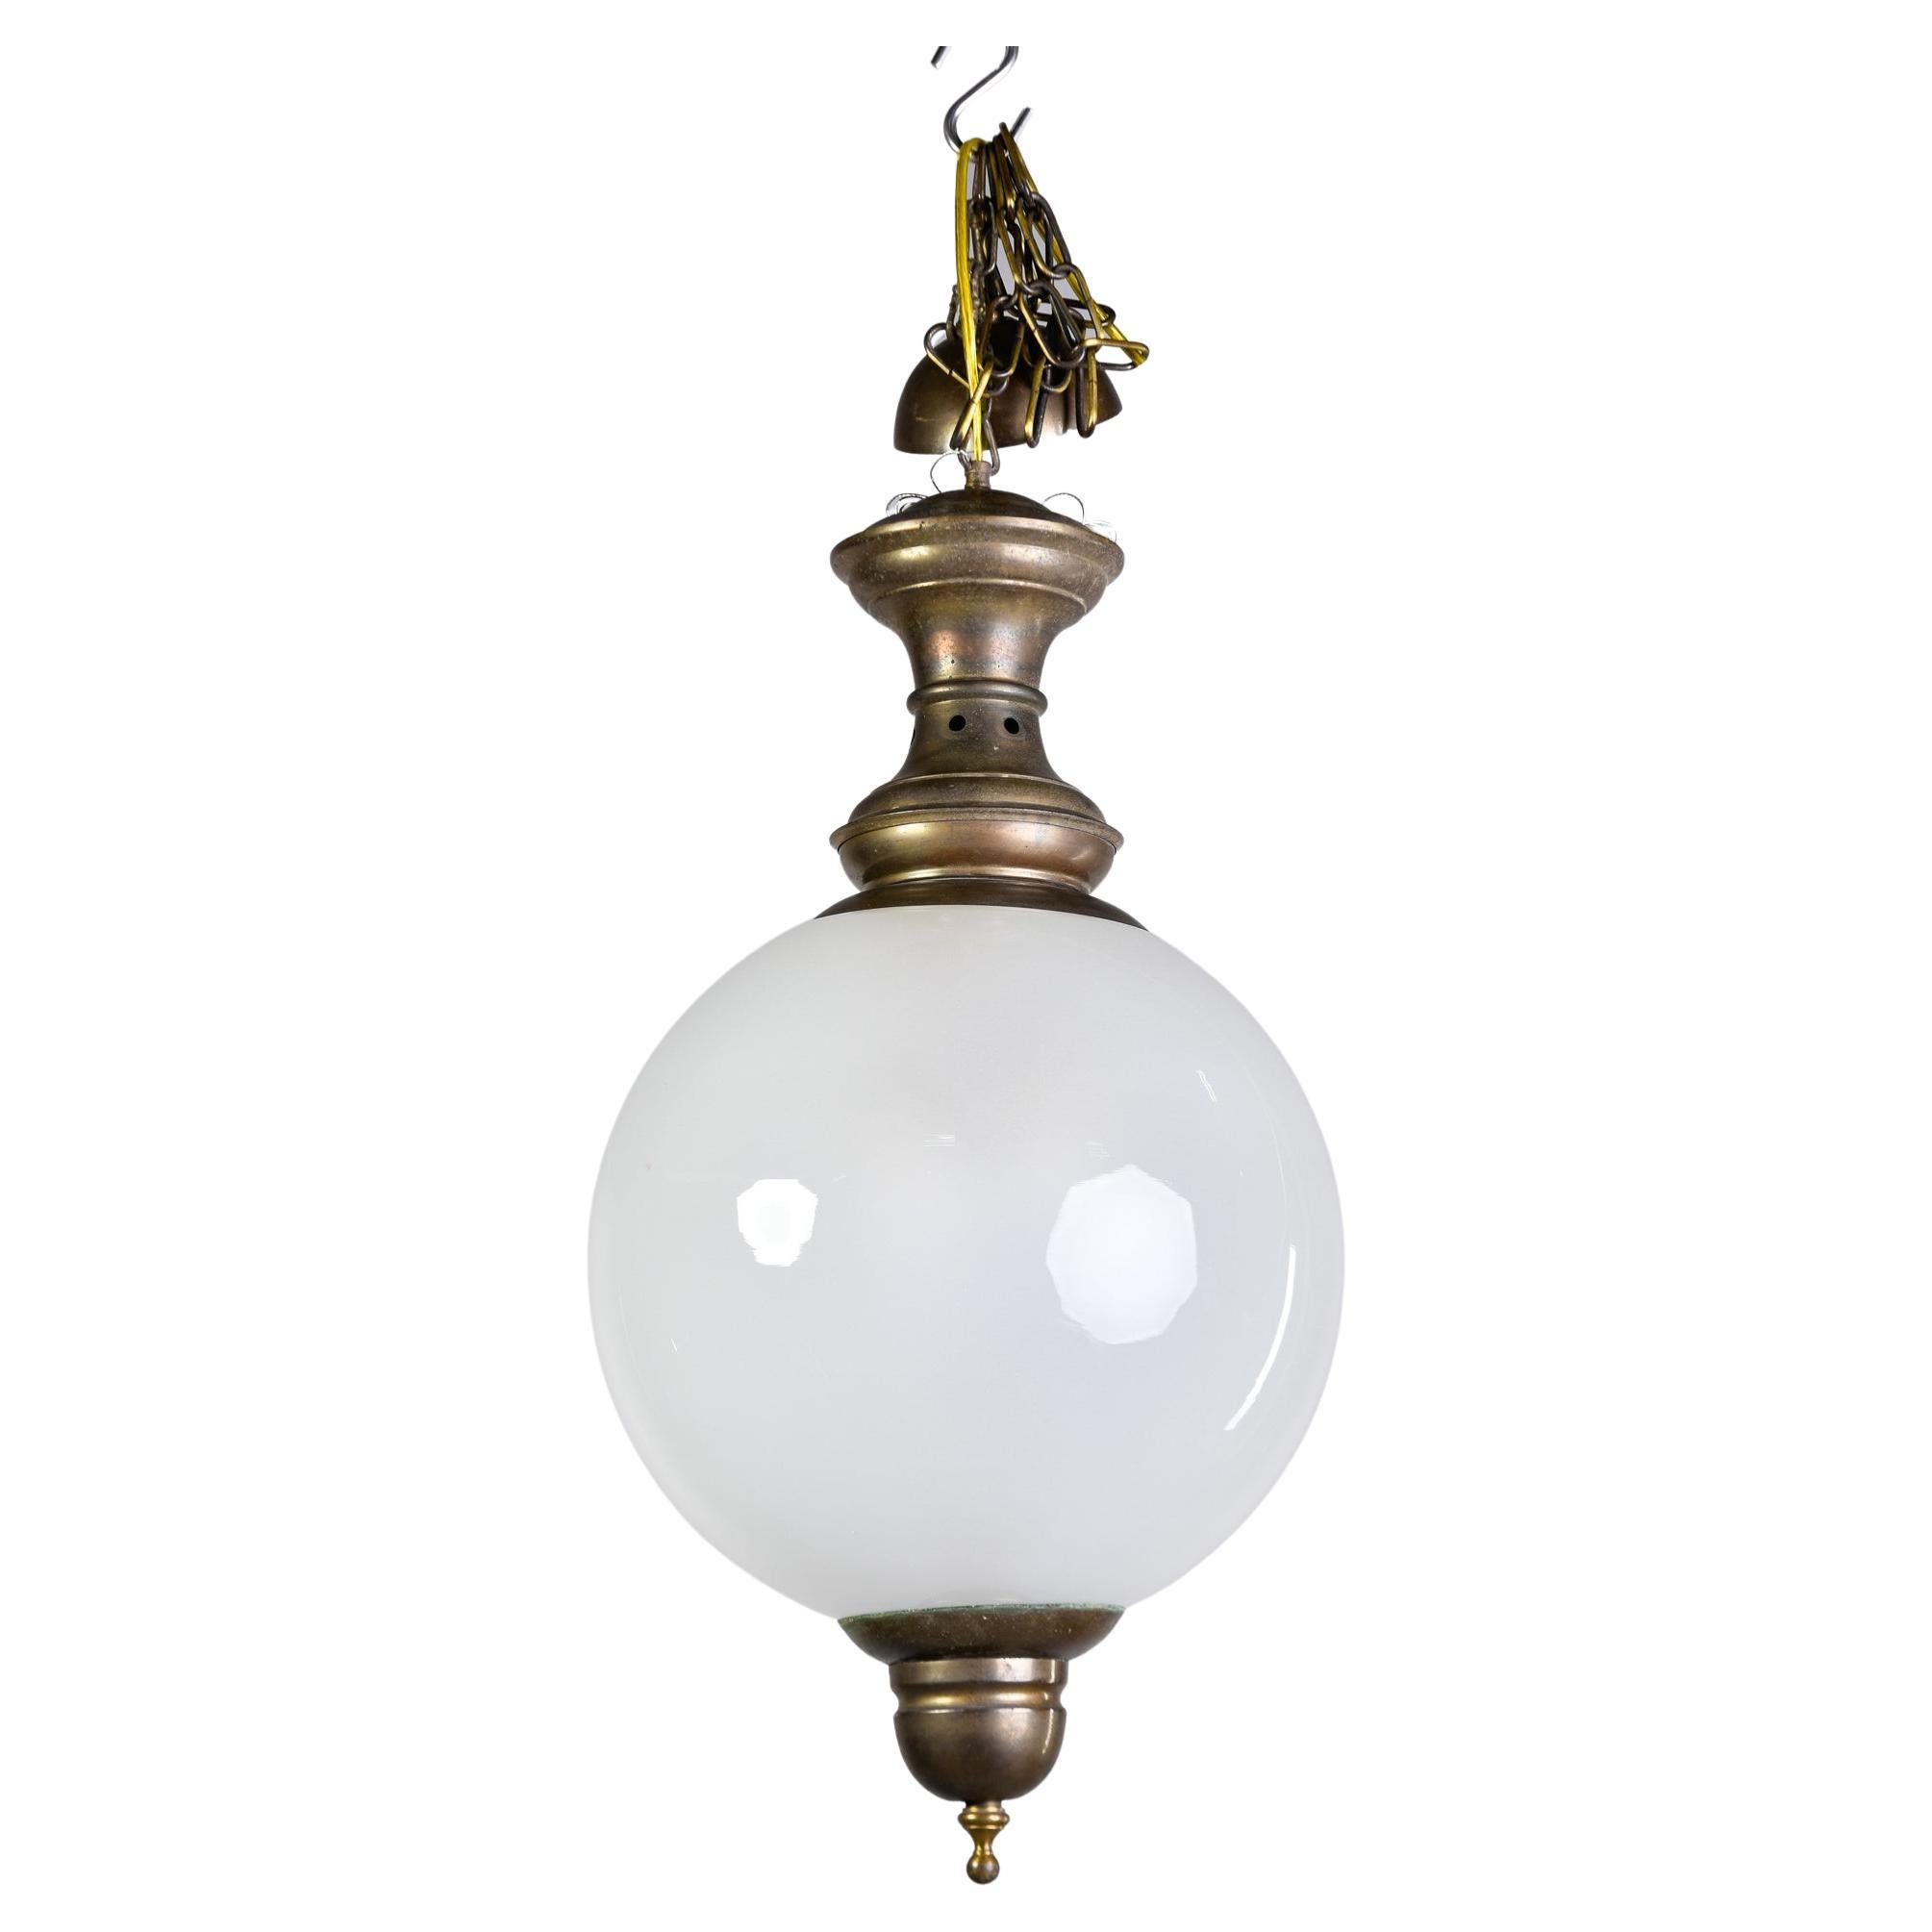 Midcentury White Glass Globe Fixture with Bronze Fitting For Sale